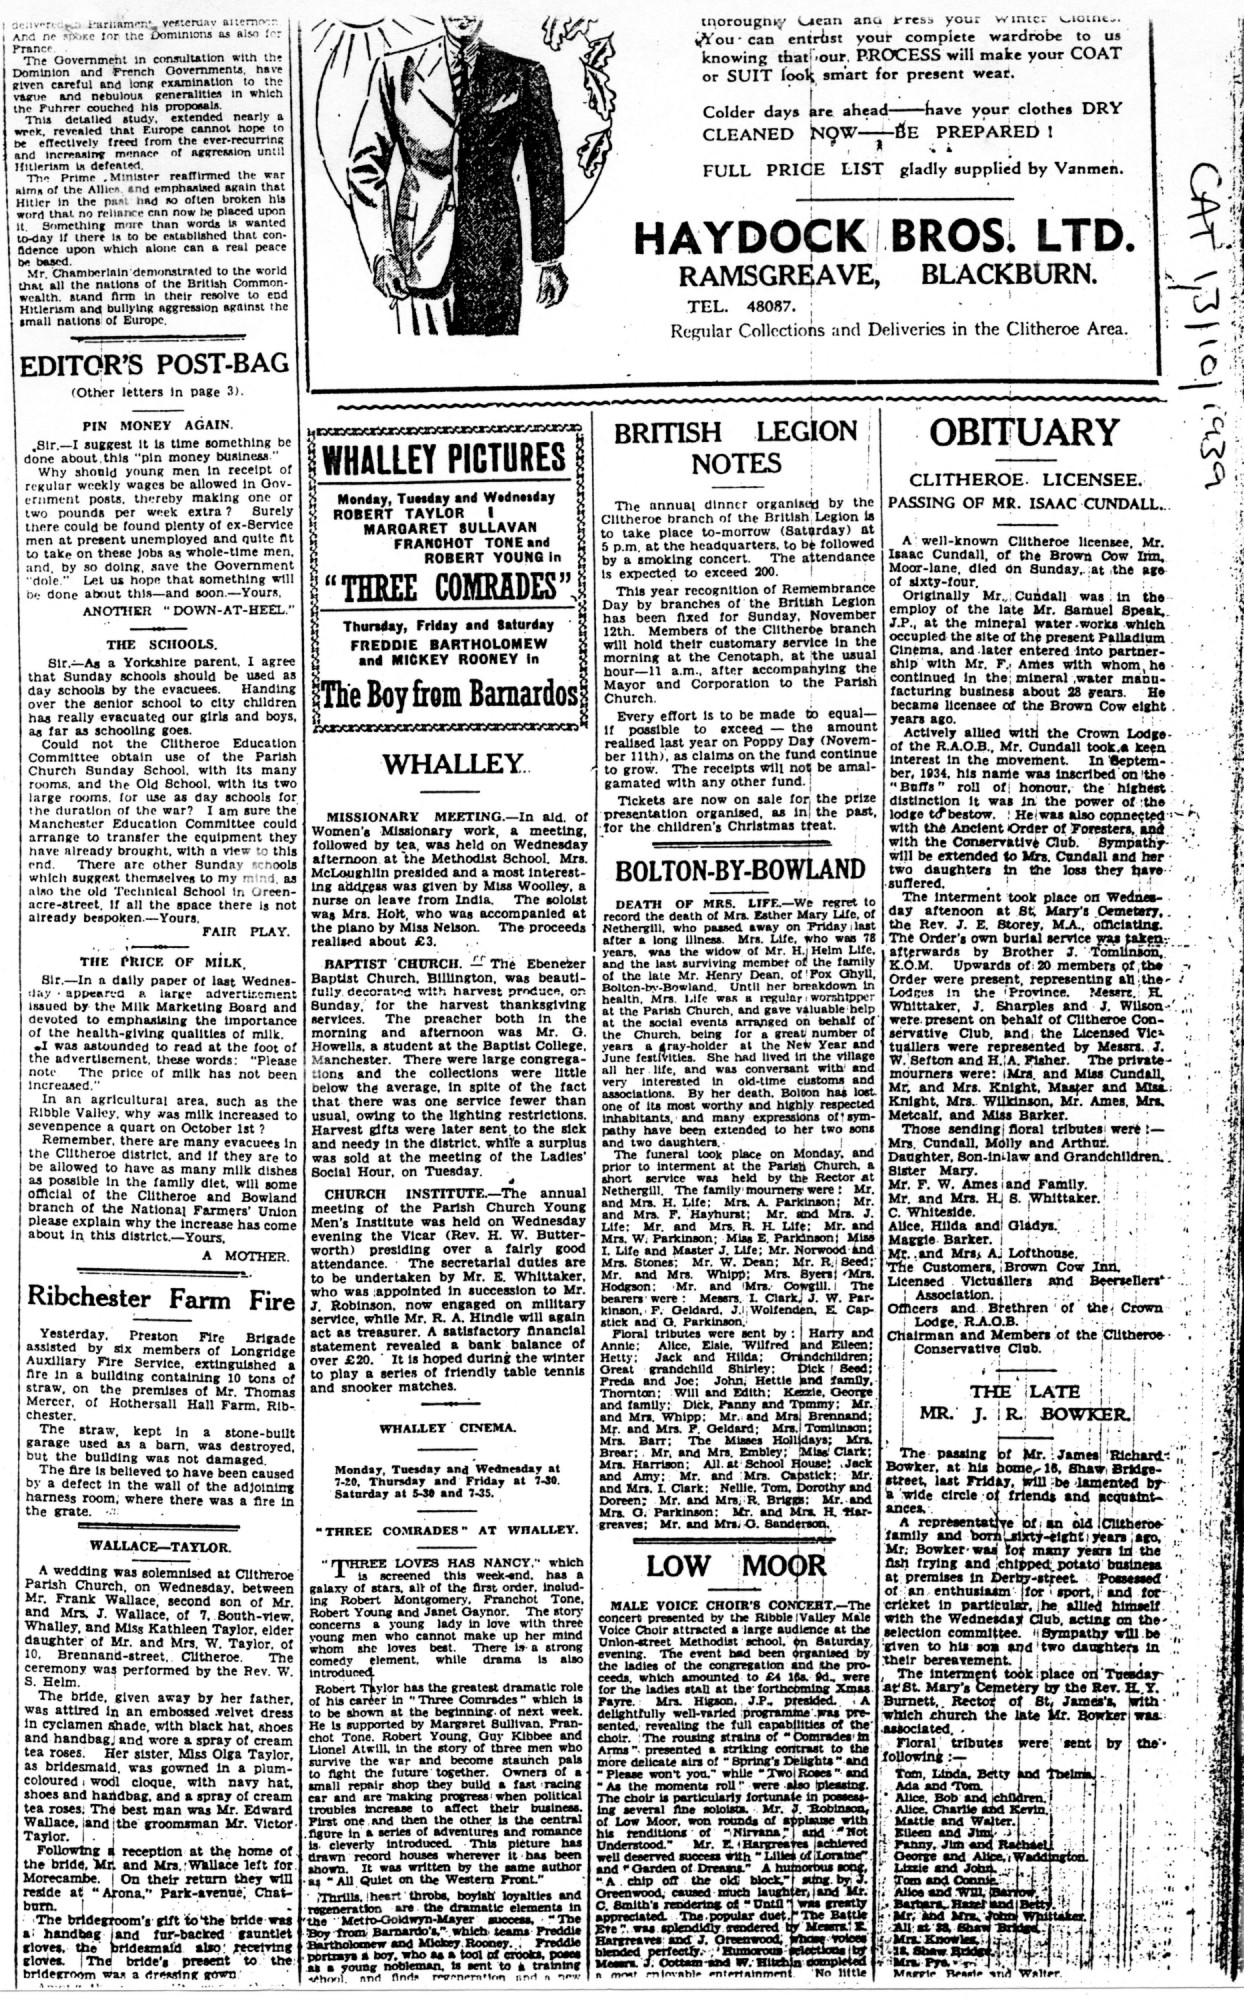 cundall/images/Isaac_Cundall_1874_Obituary_Paper